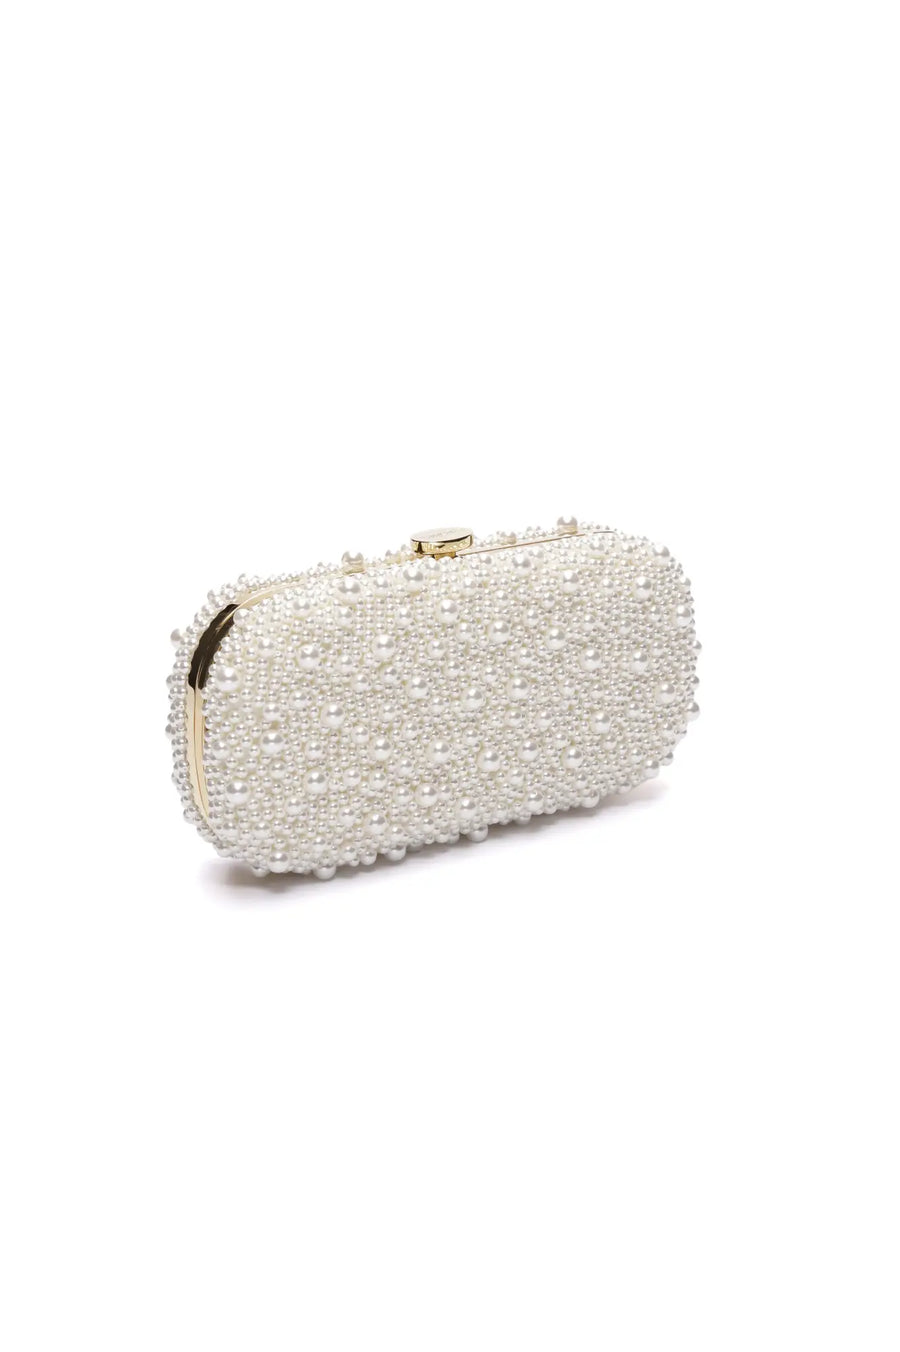 True Love Pearl Clutch from The Bella Rosa Collection on a white background.